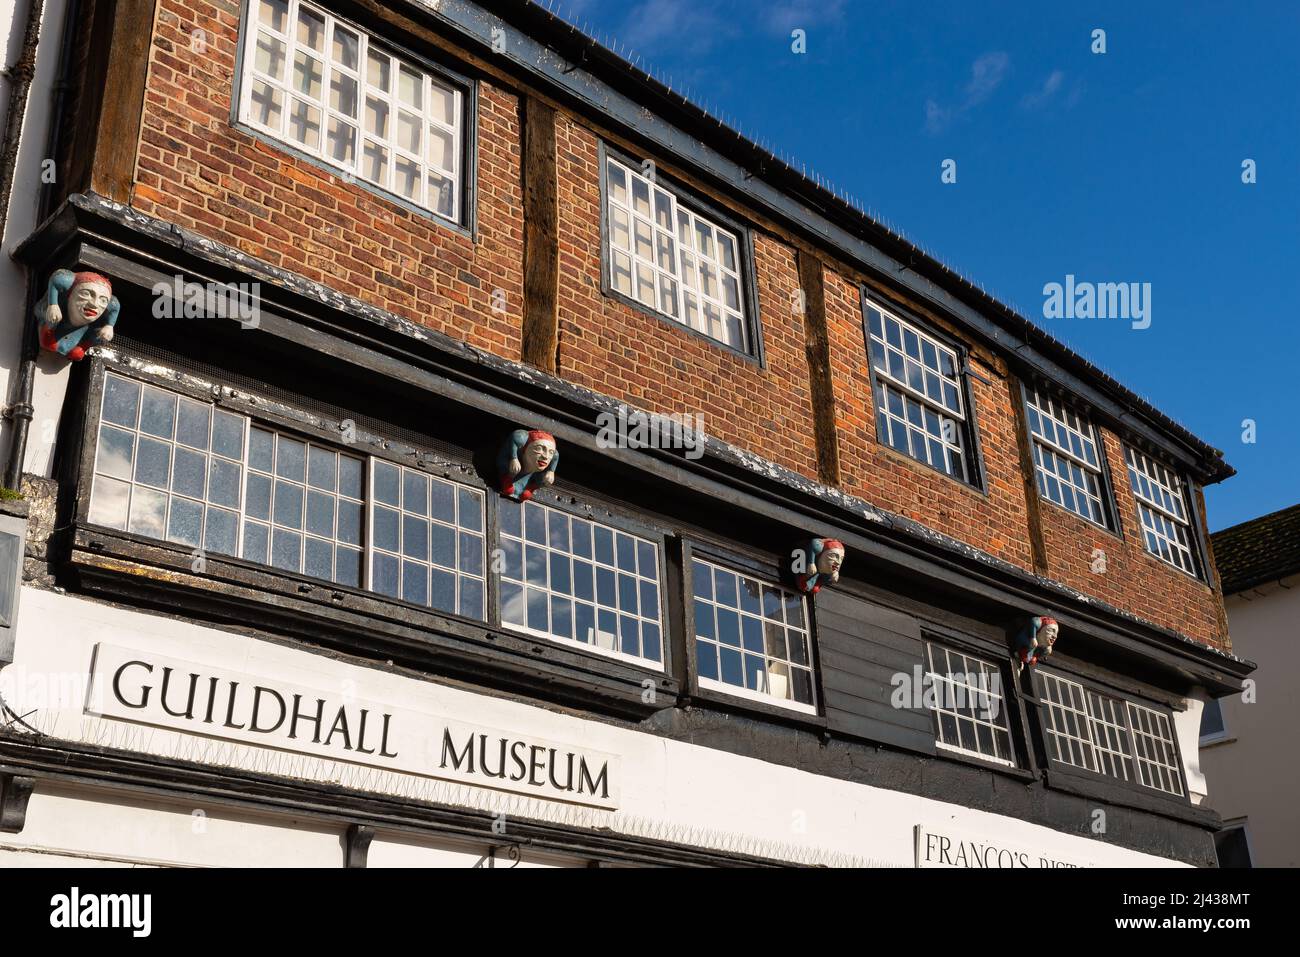 Carlisle, England - United Kingdom - March 17th, 2022: Exterior of the historic Guildhall building, built in the late 14th century, on a beautiful Spr Stock Photo